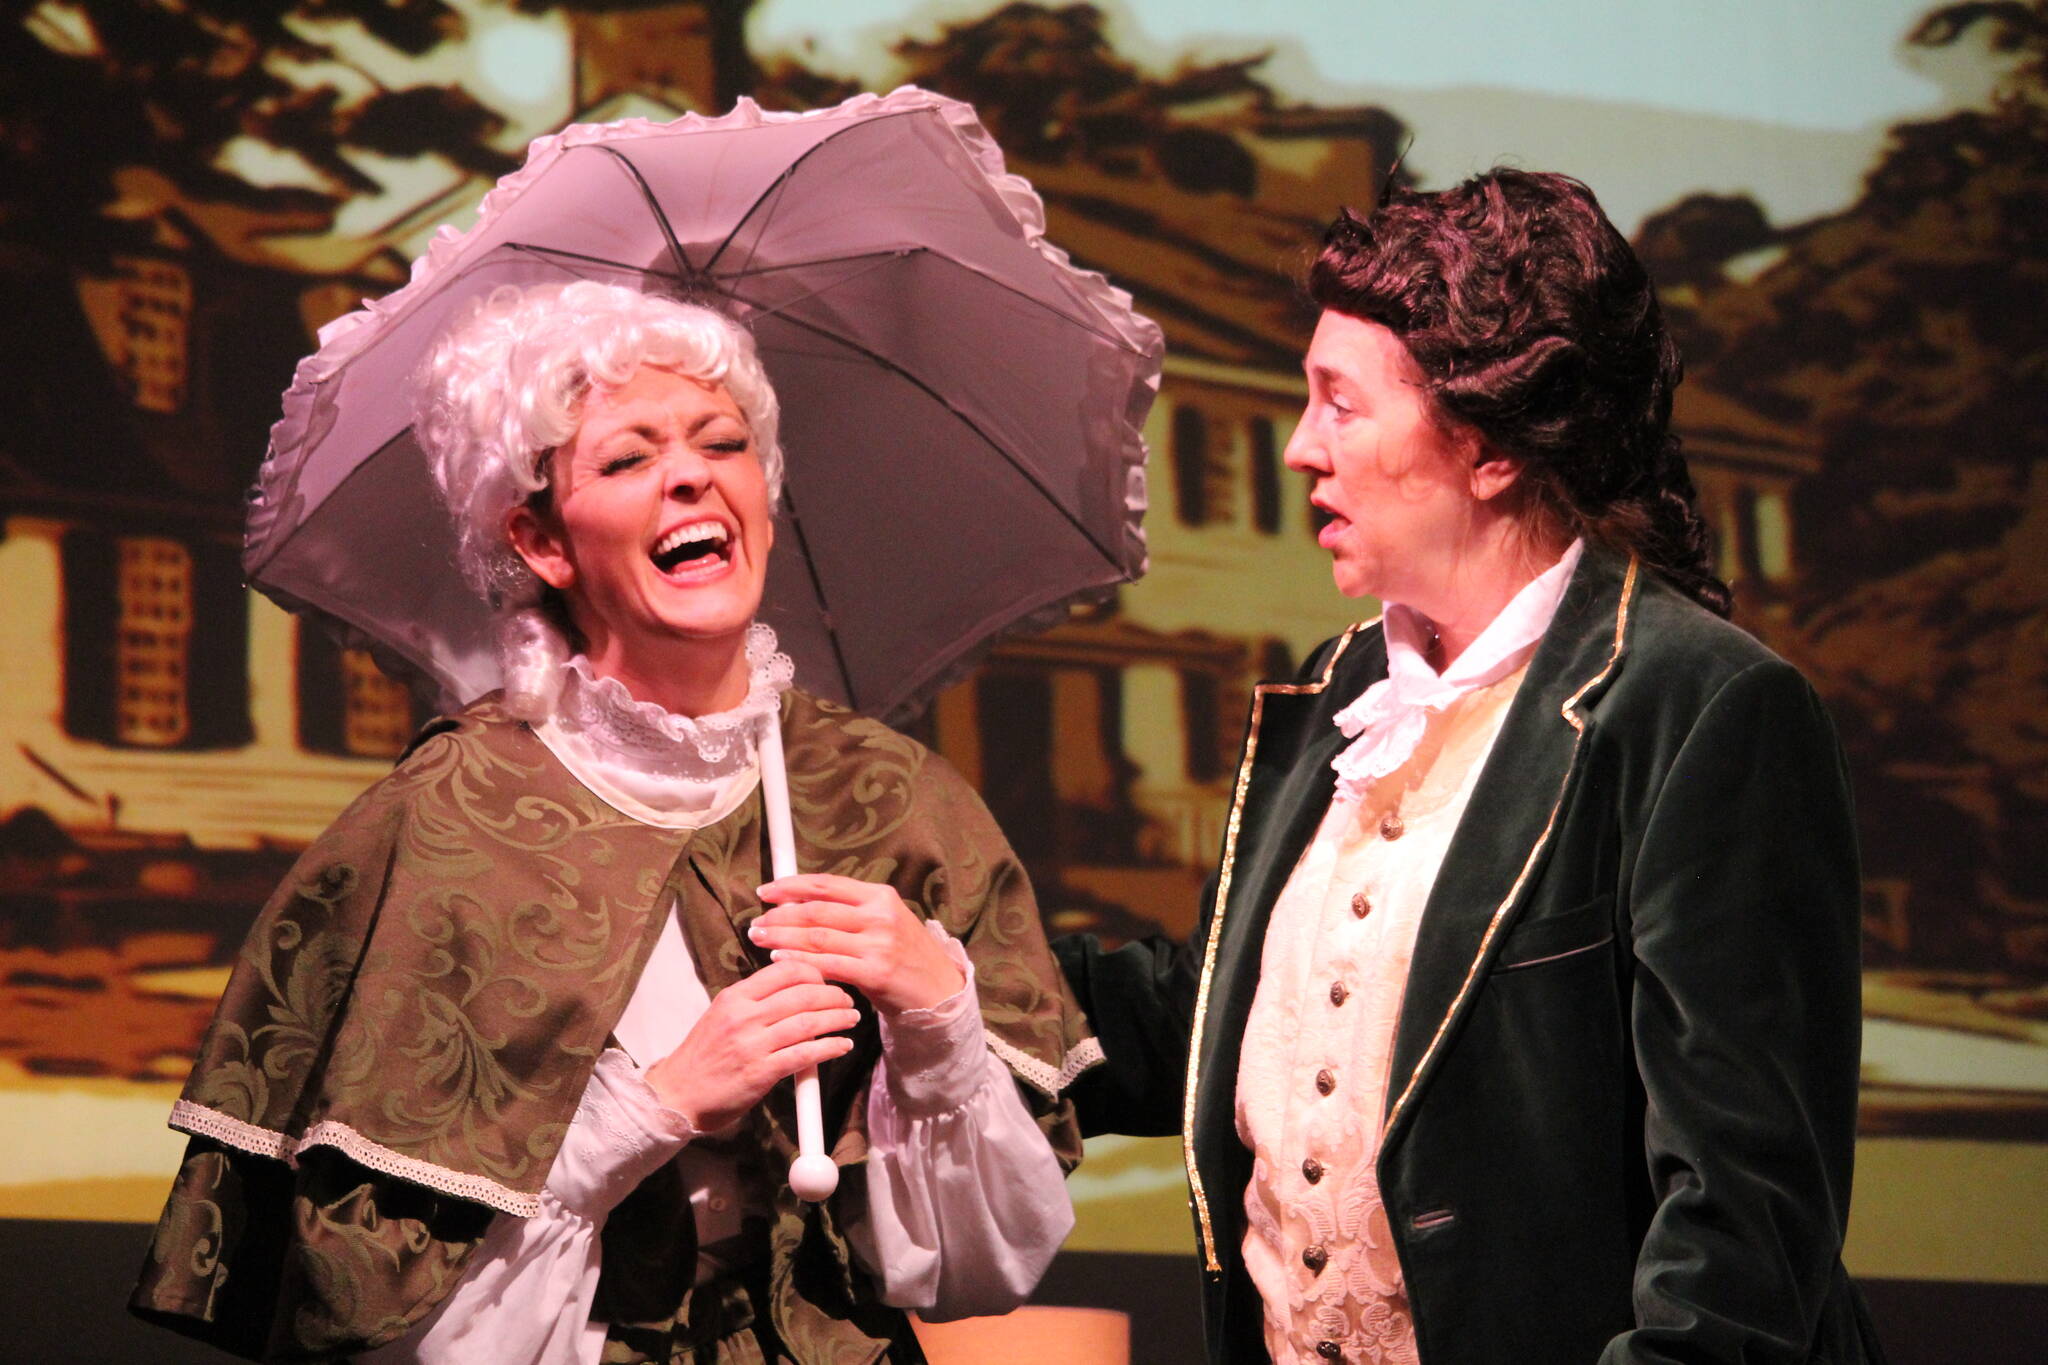 Photo by Karina Andrew/Whidbey News-Times
Abby Thuet, left, and Tamra Sipes play Dolley and James Madison, respectively, in a dream scene set in 1787.